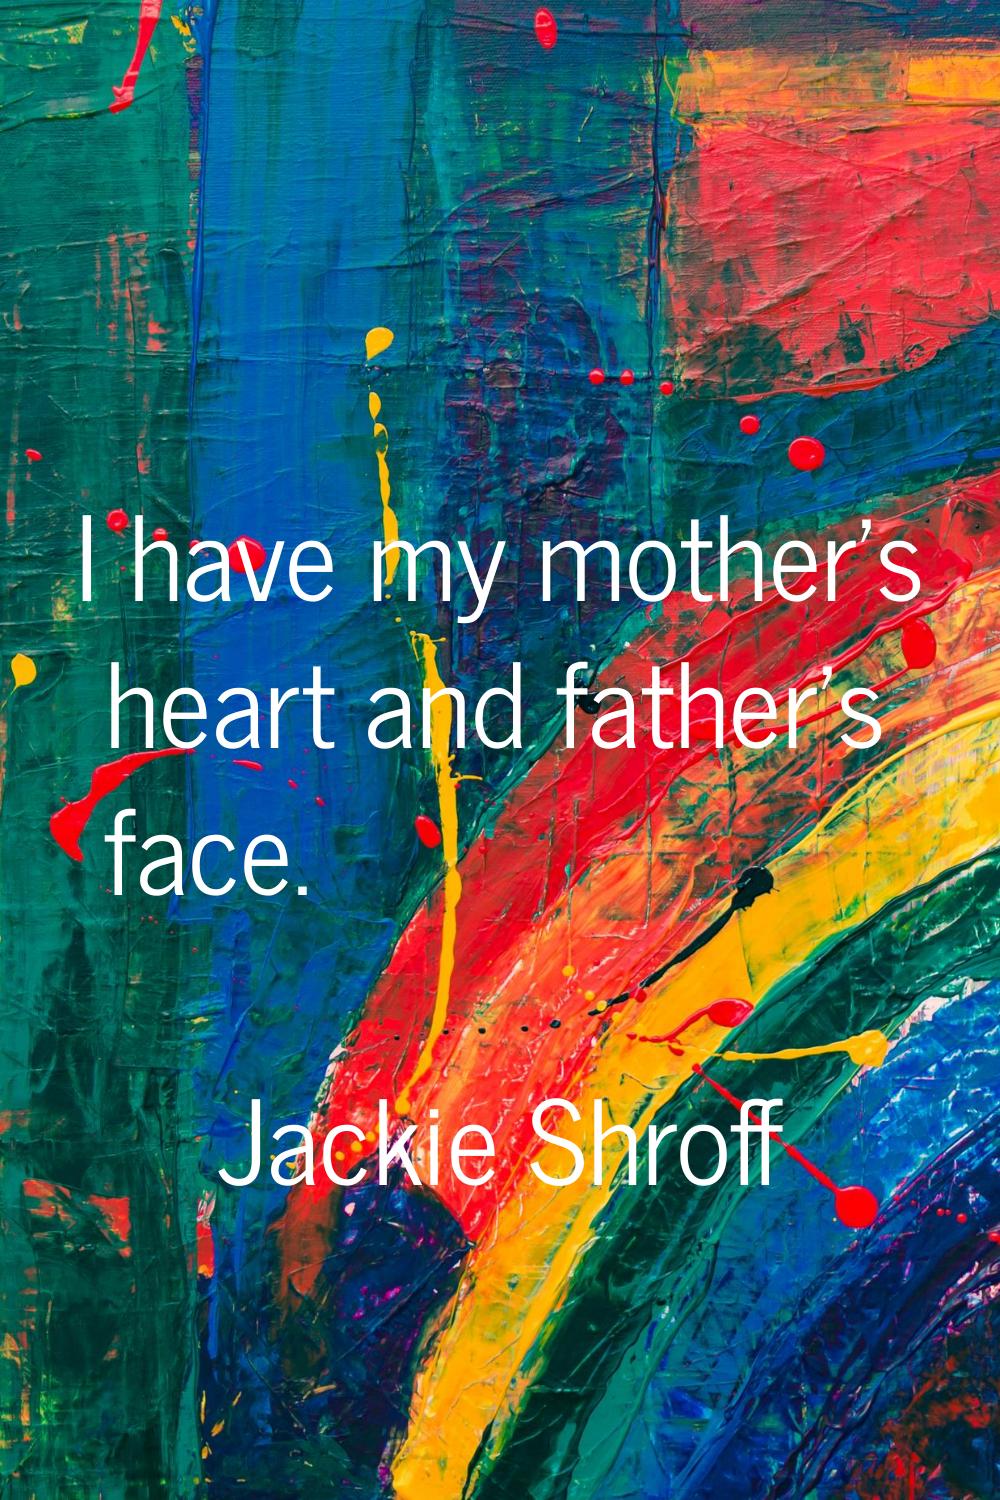 I have my mother's heart and father's face.